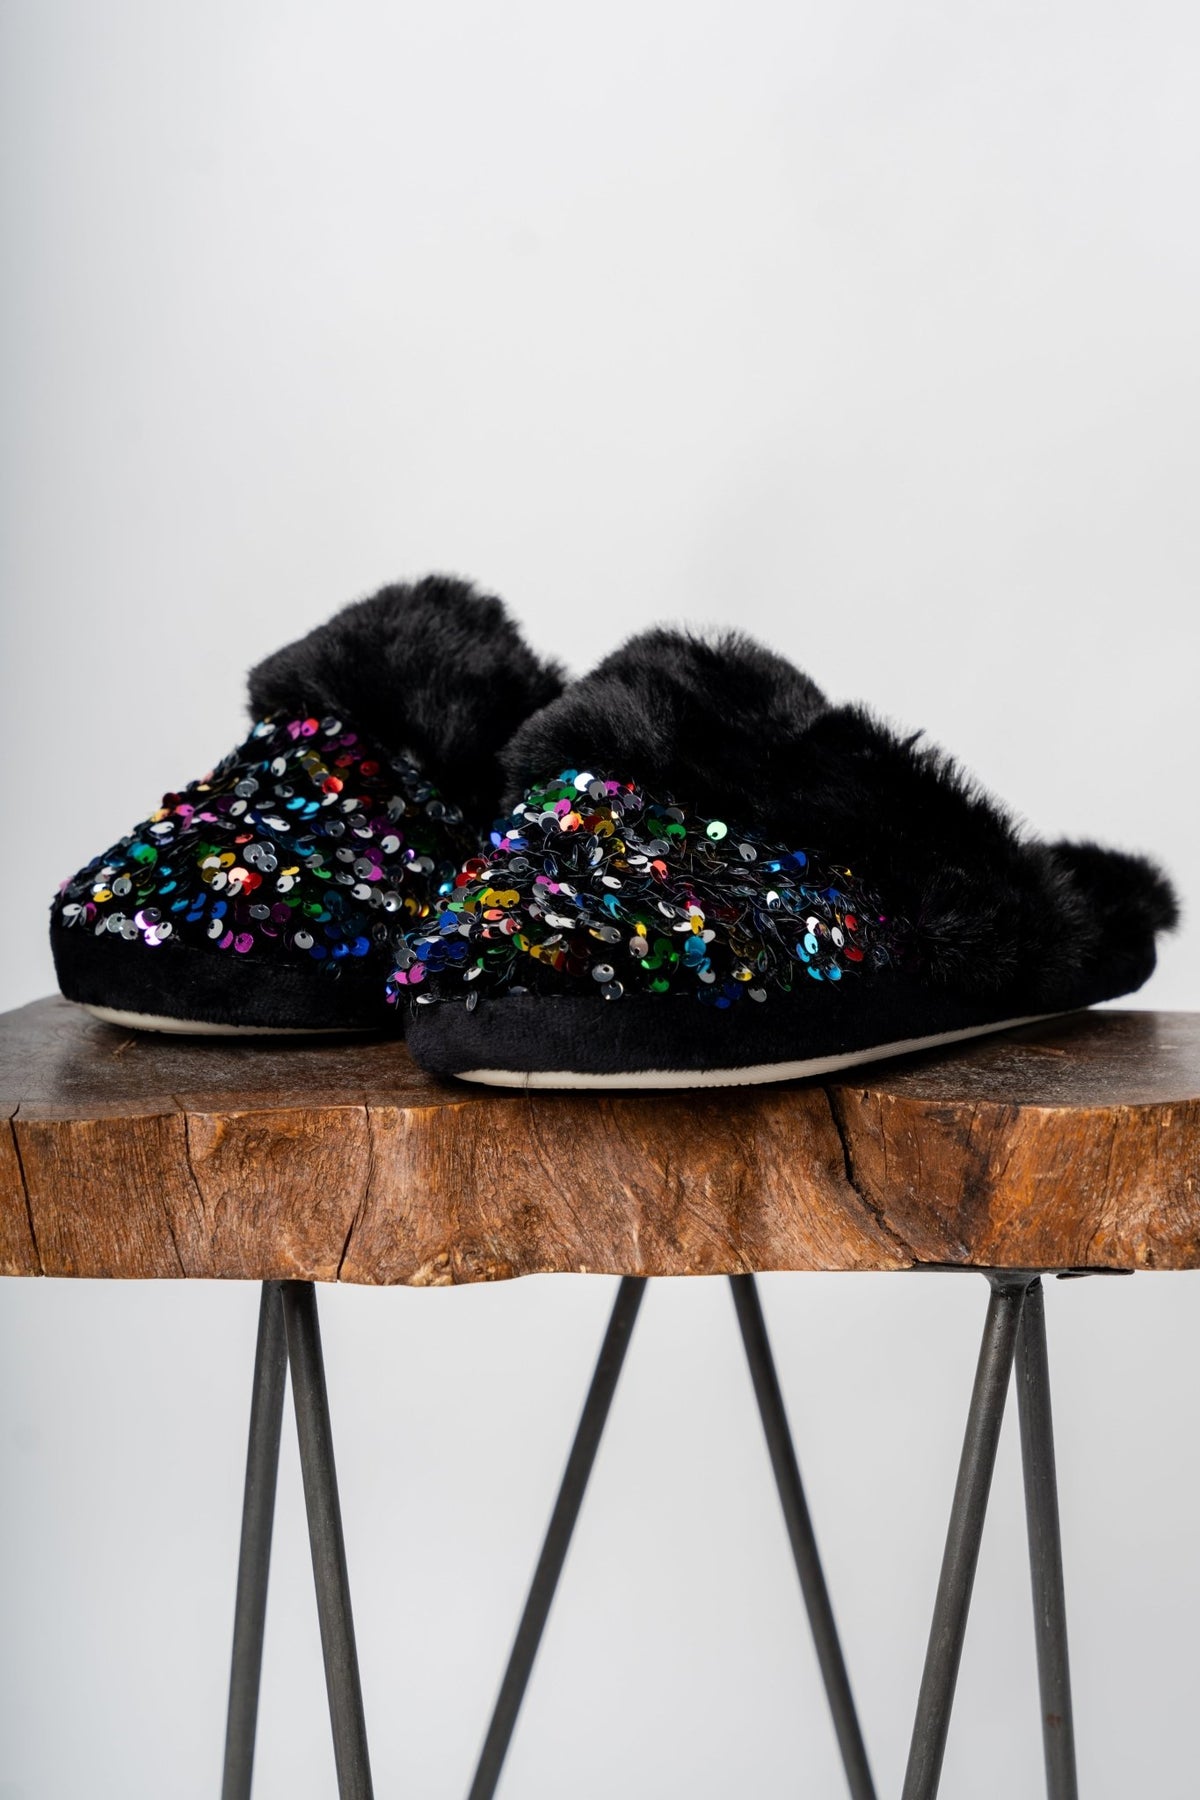 Fiesta sequin slippers black - Trendy Holiday Apparel at Lush Fashion Lounge Boutique in Oklahoma City